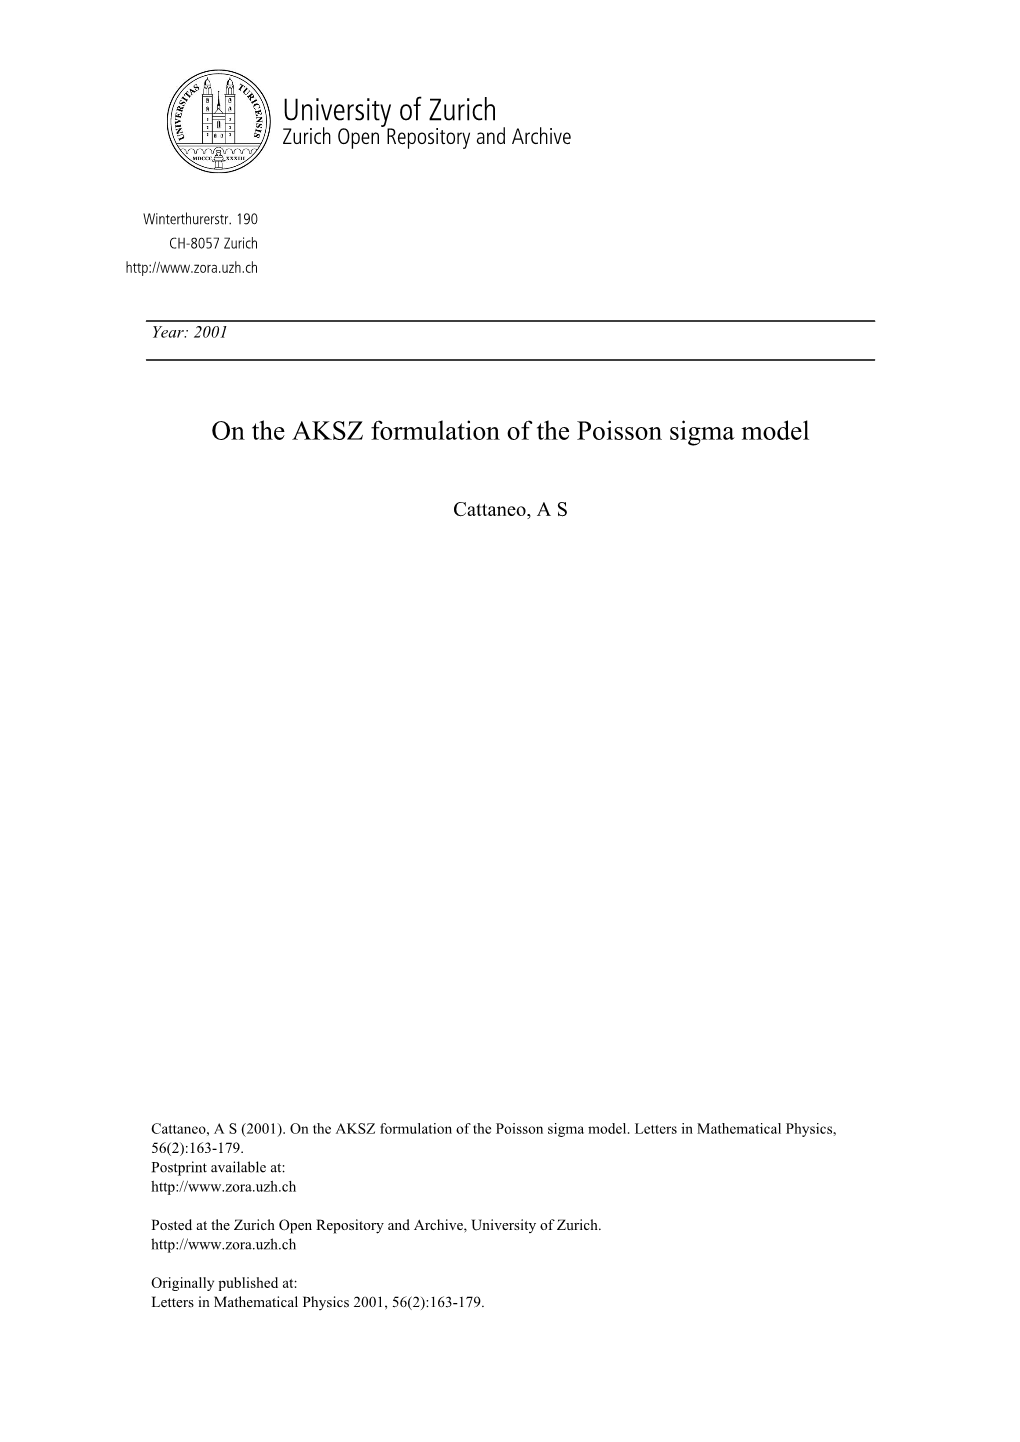 On the AKSZ Formulation of the Poisson Sigma Model